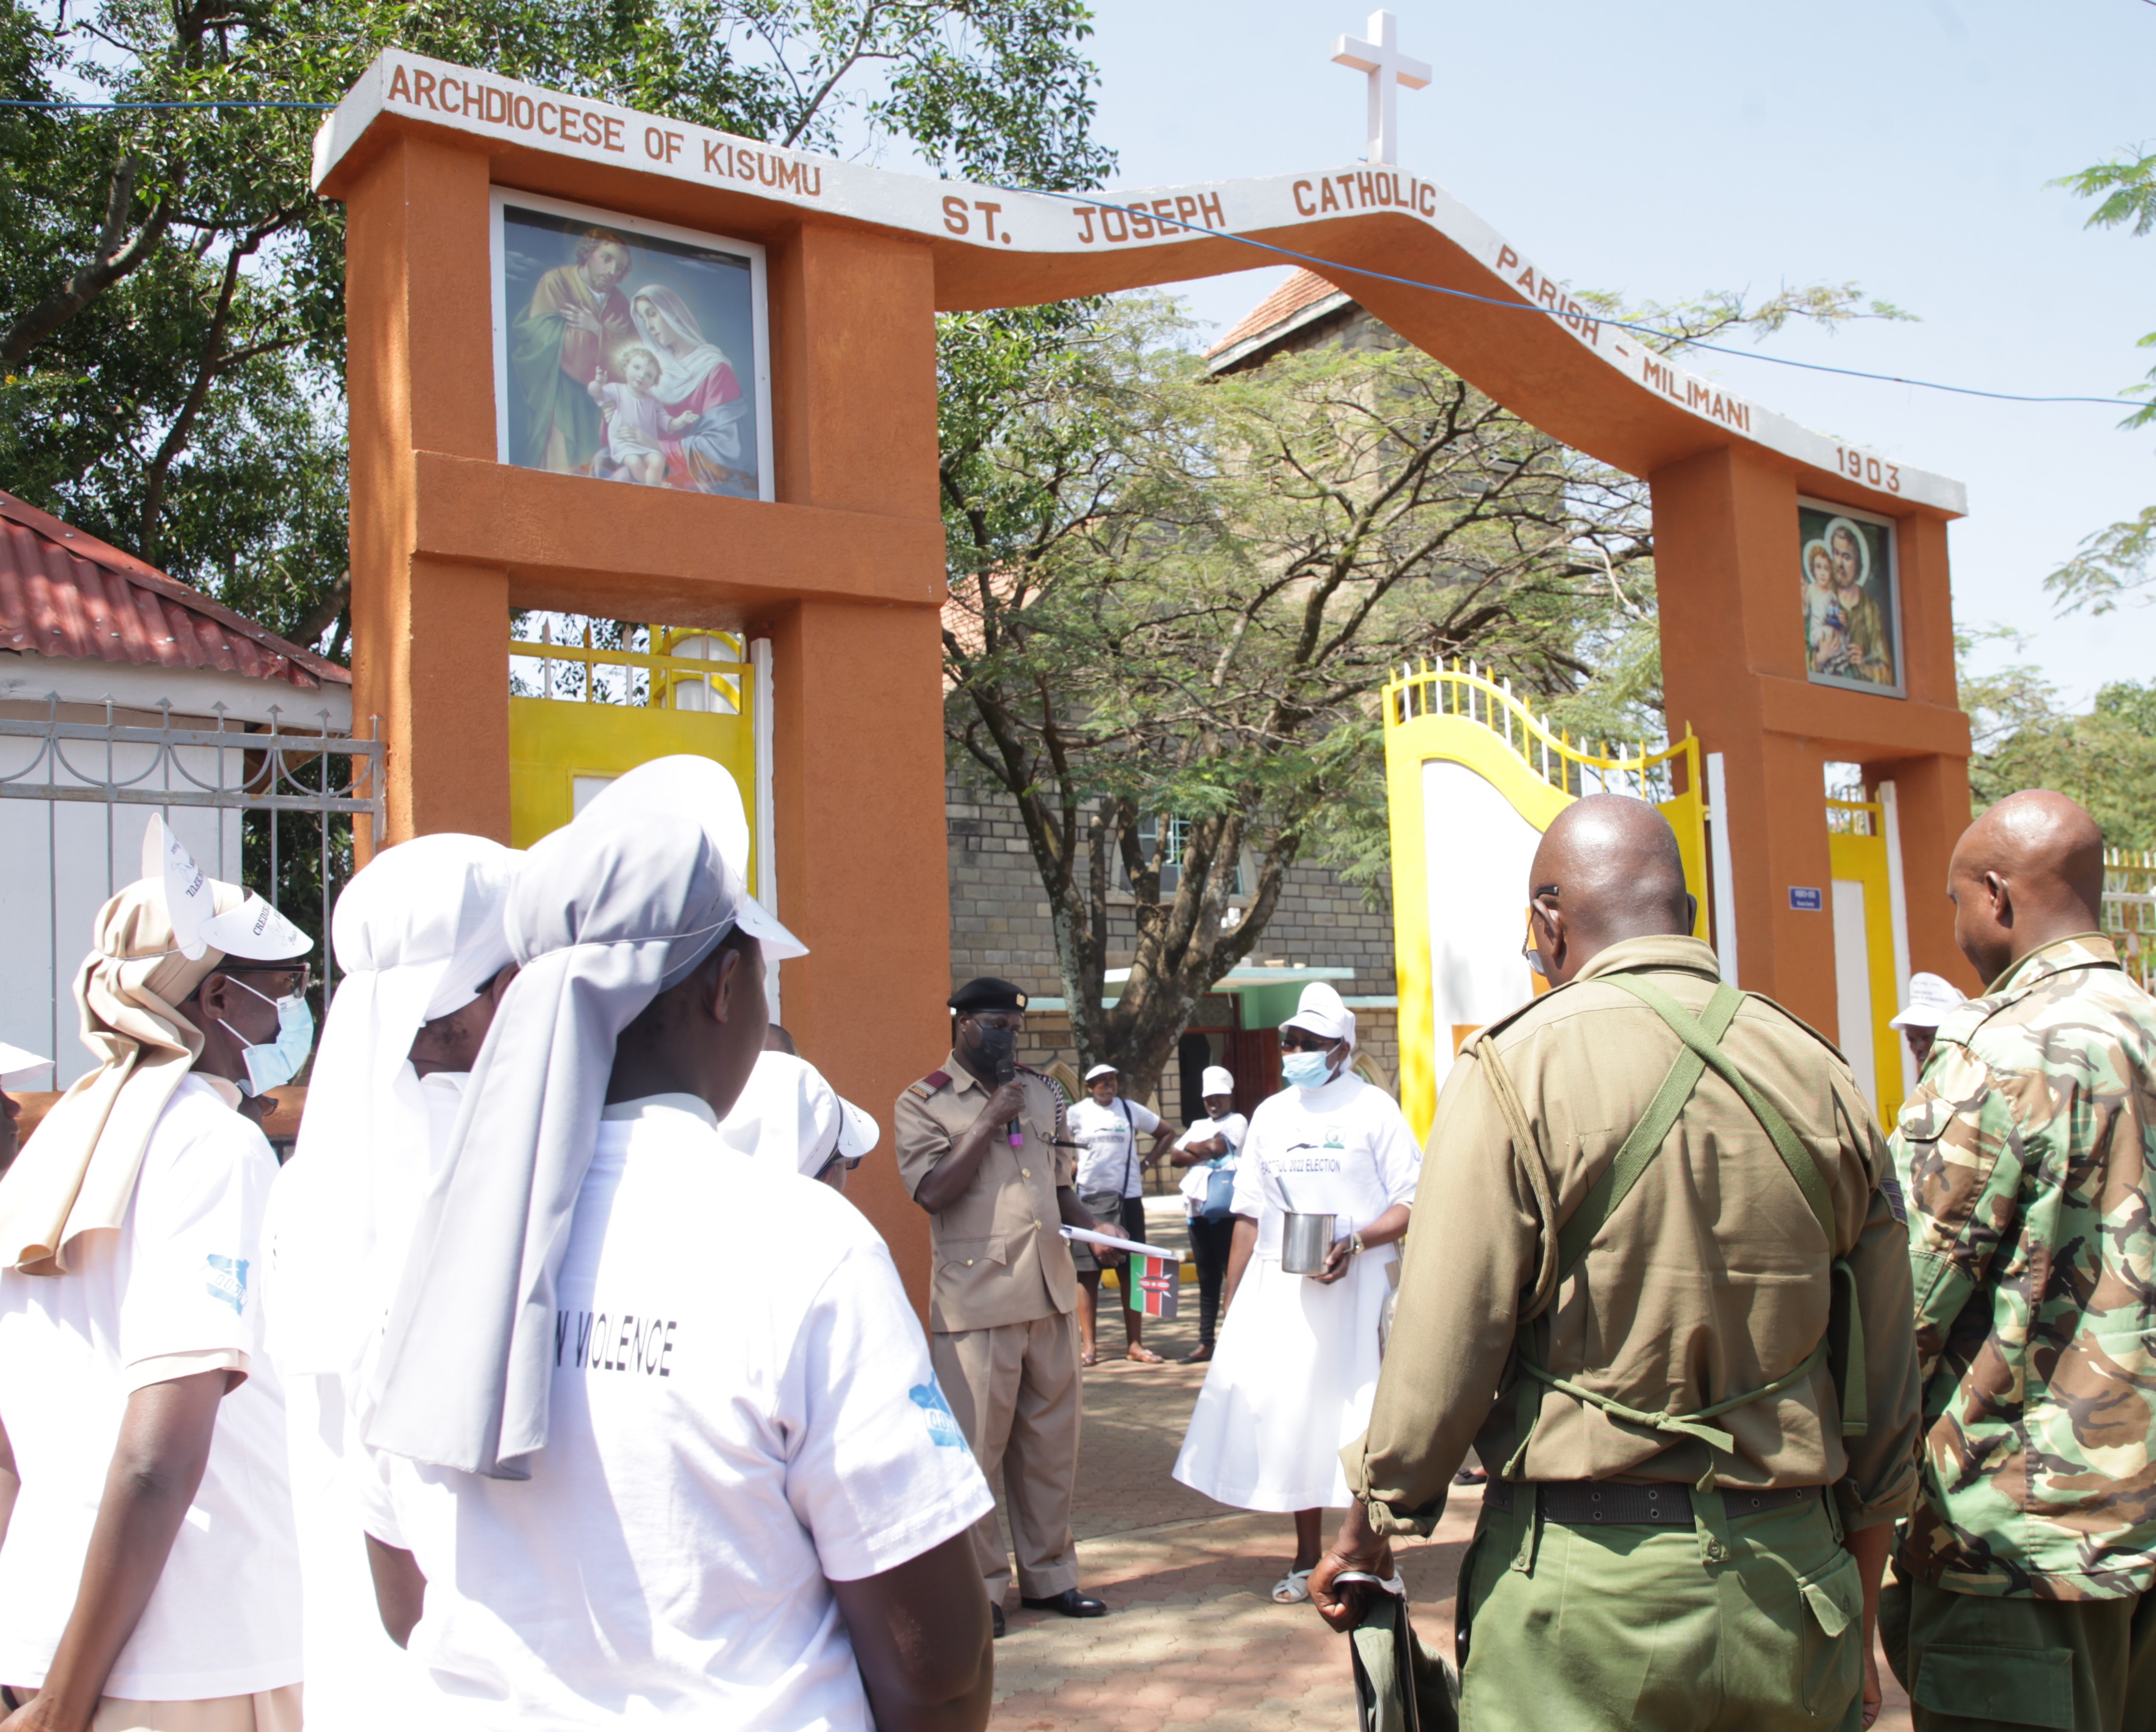 Franciscan Sisters of St. Anna and security officers bow for prayers and blessings in front of St. Joseph Catholic Church in Milimani, Kisumu, Kenya, on July 16 ahead of the peace caravan walk. (Vincent Aduda)